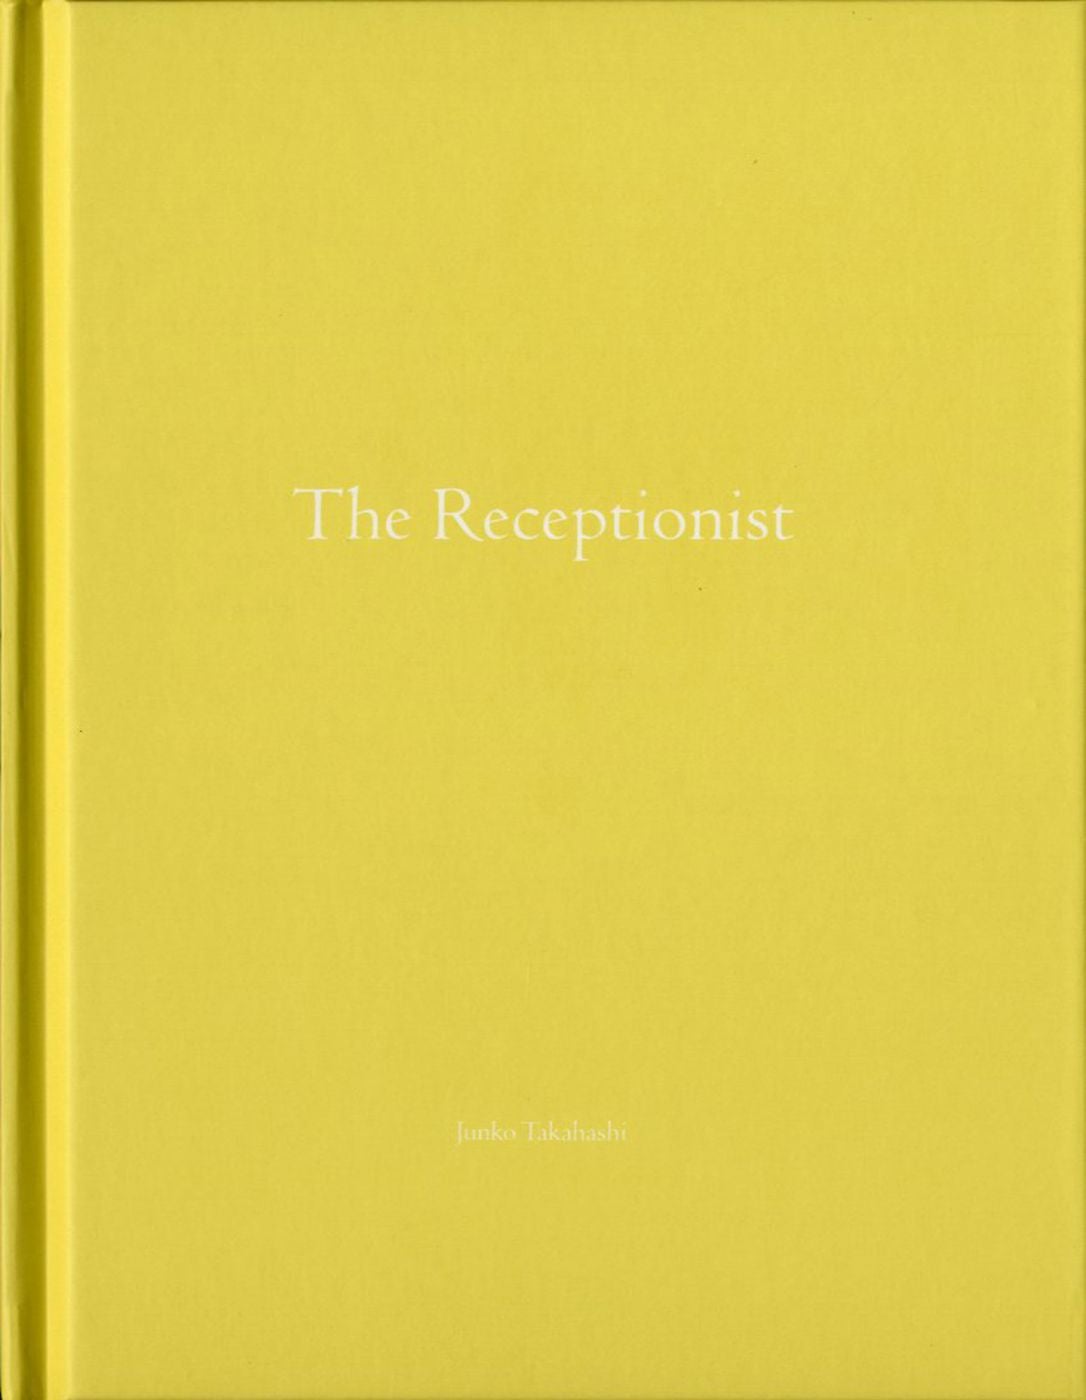 Junko Takahashi: The Receptionist (One Picture Book #38), Limited Edition (with Print)